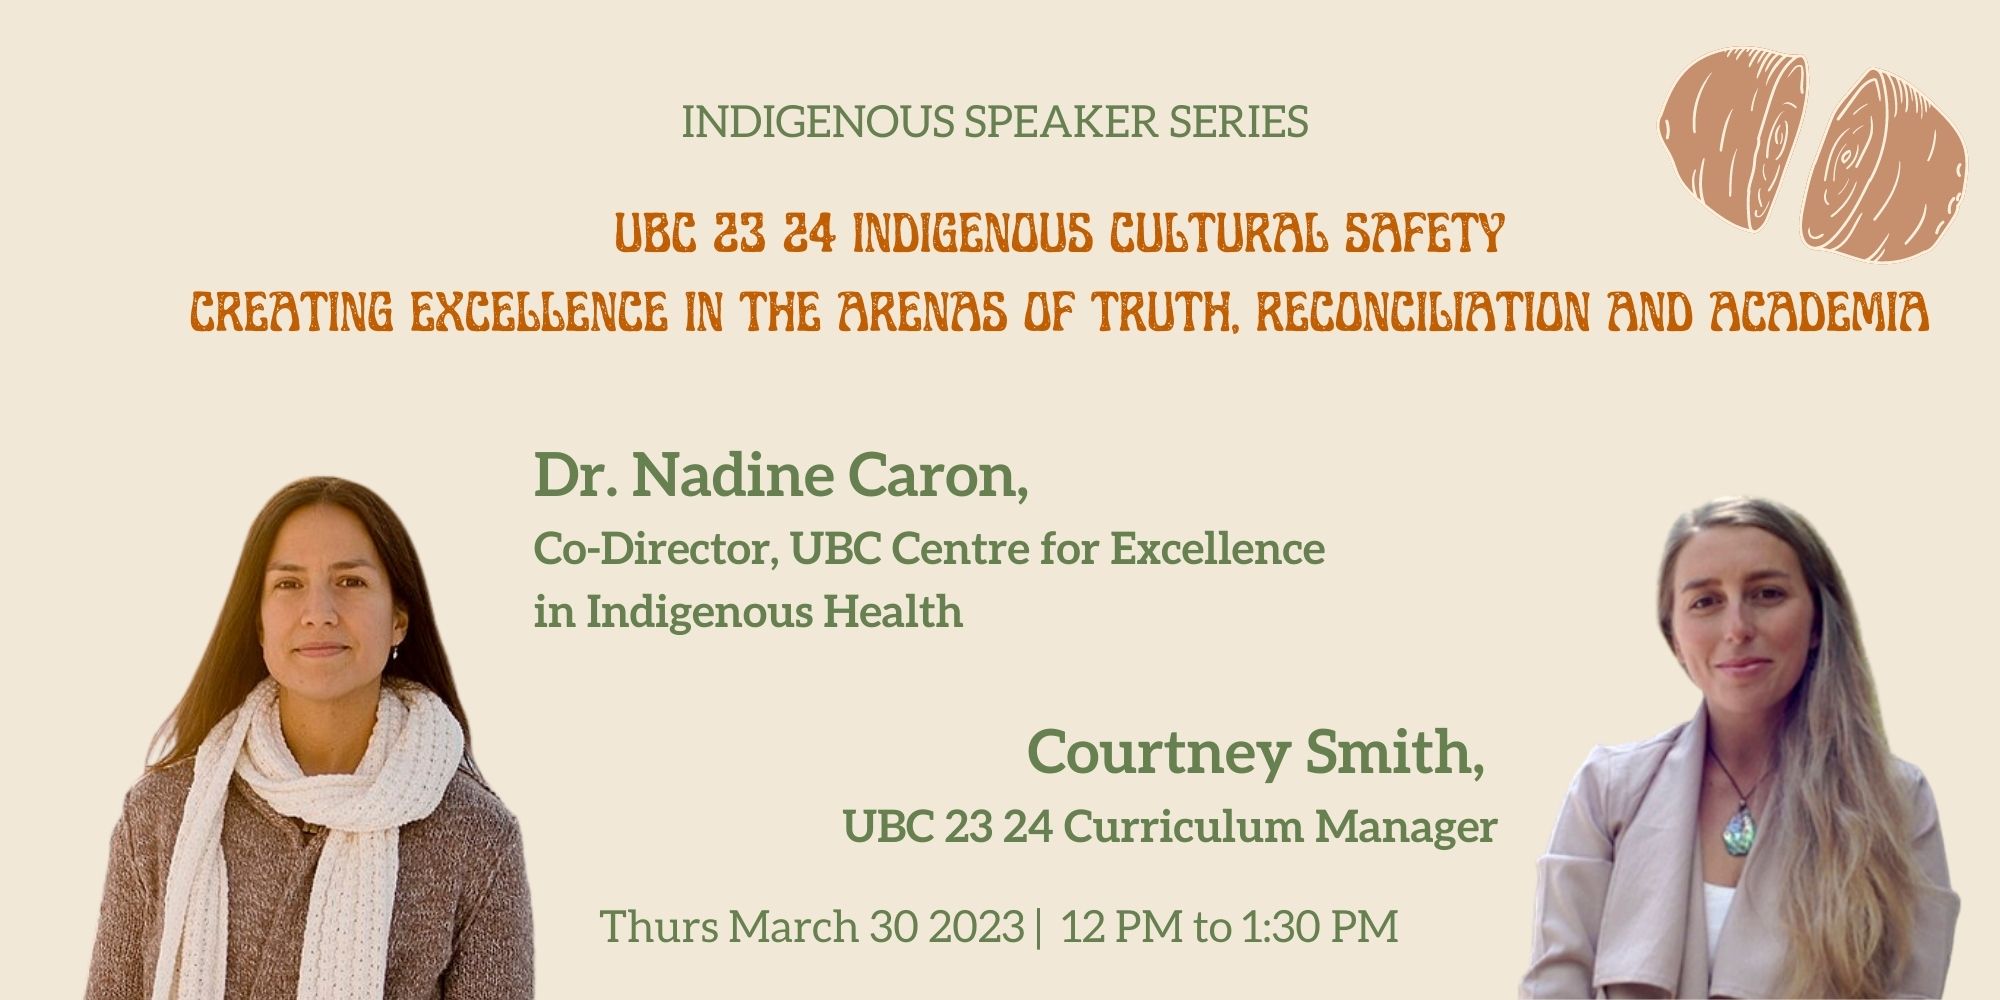 The Faculty of Medicine REDI Office presents: UBC 23 24 Indigenous Cultural Safety: Creating Excellence in the Arenas of Truth, Reconciliation and Academia